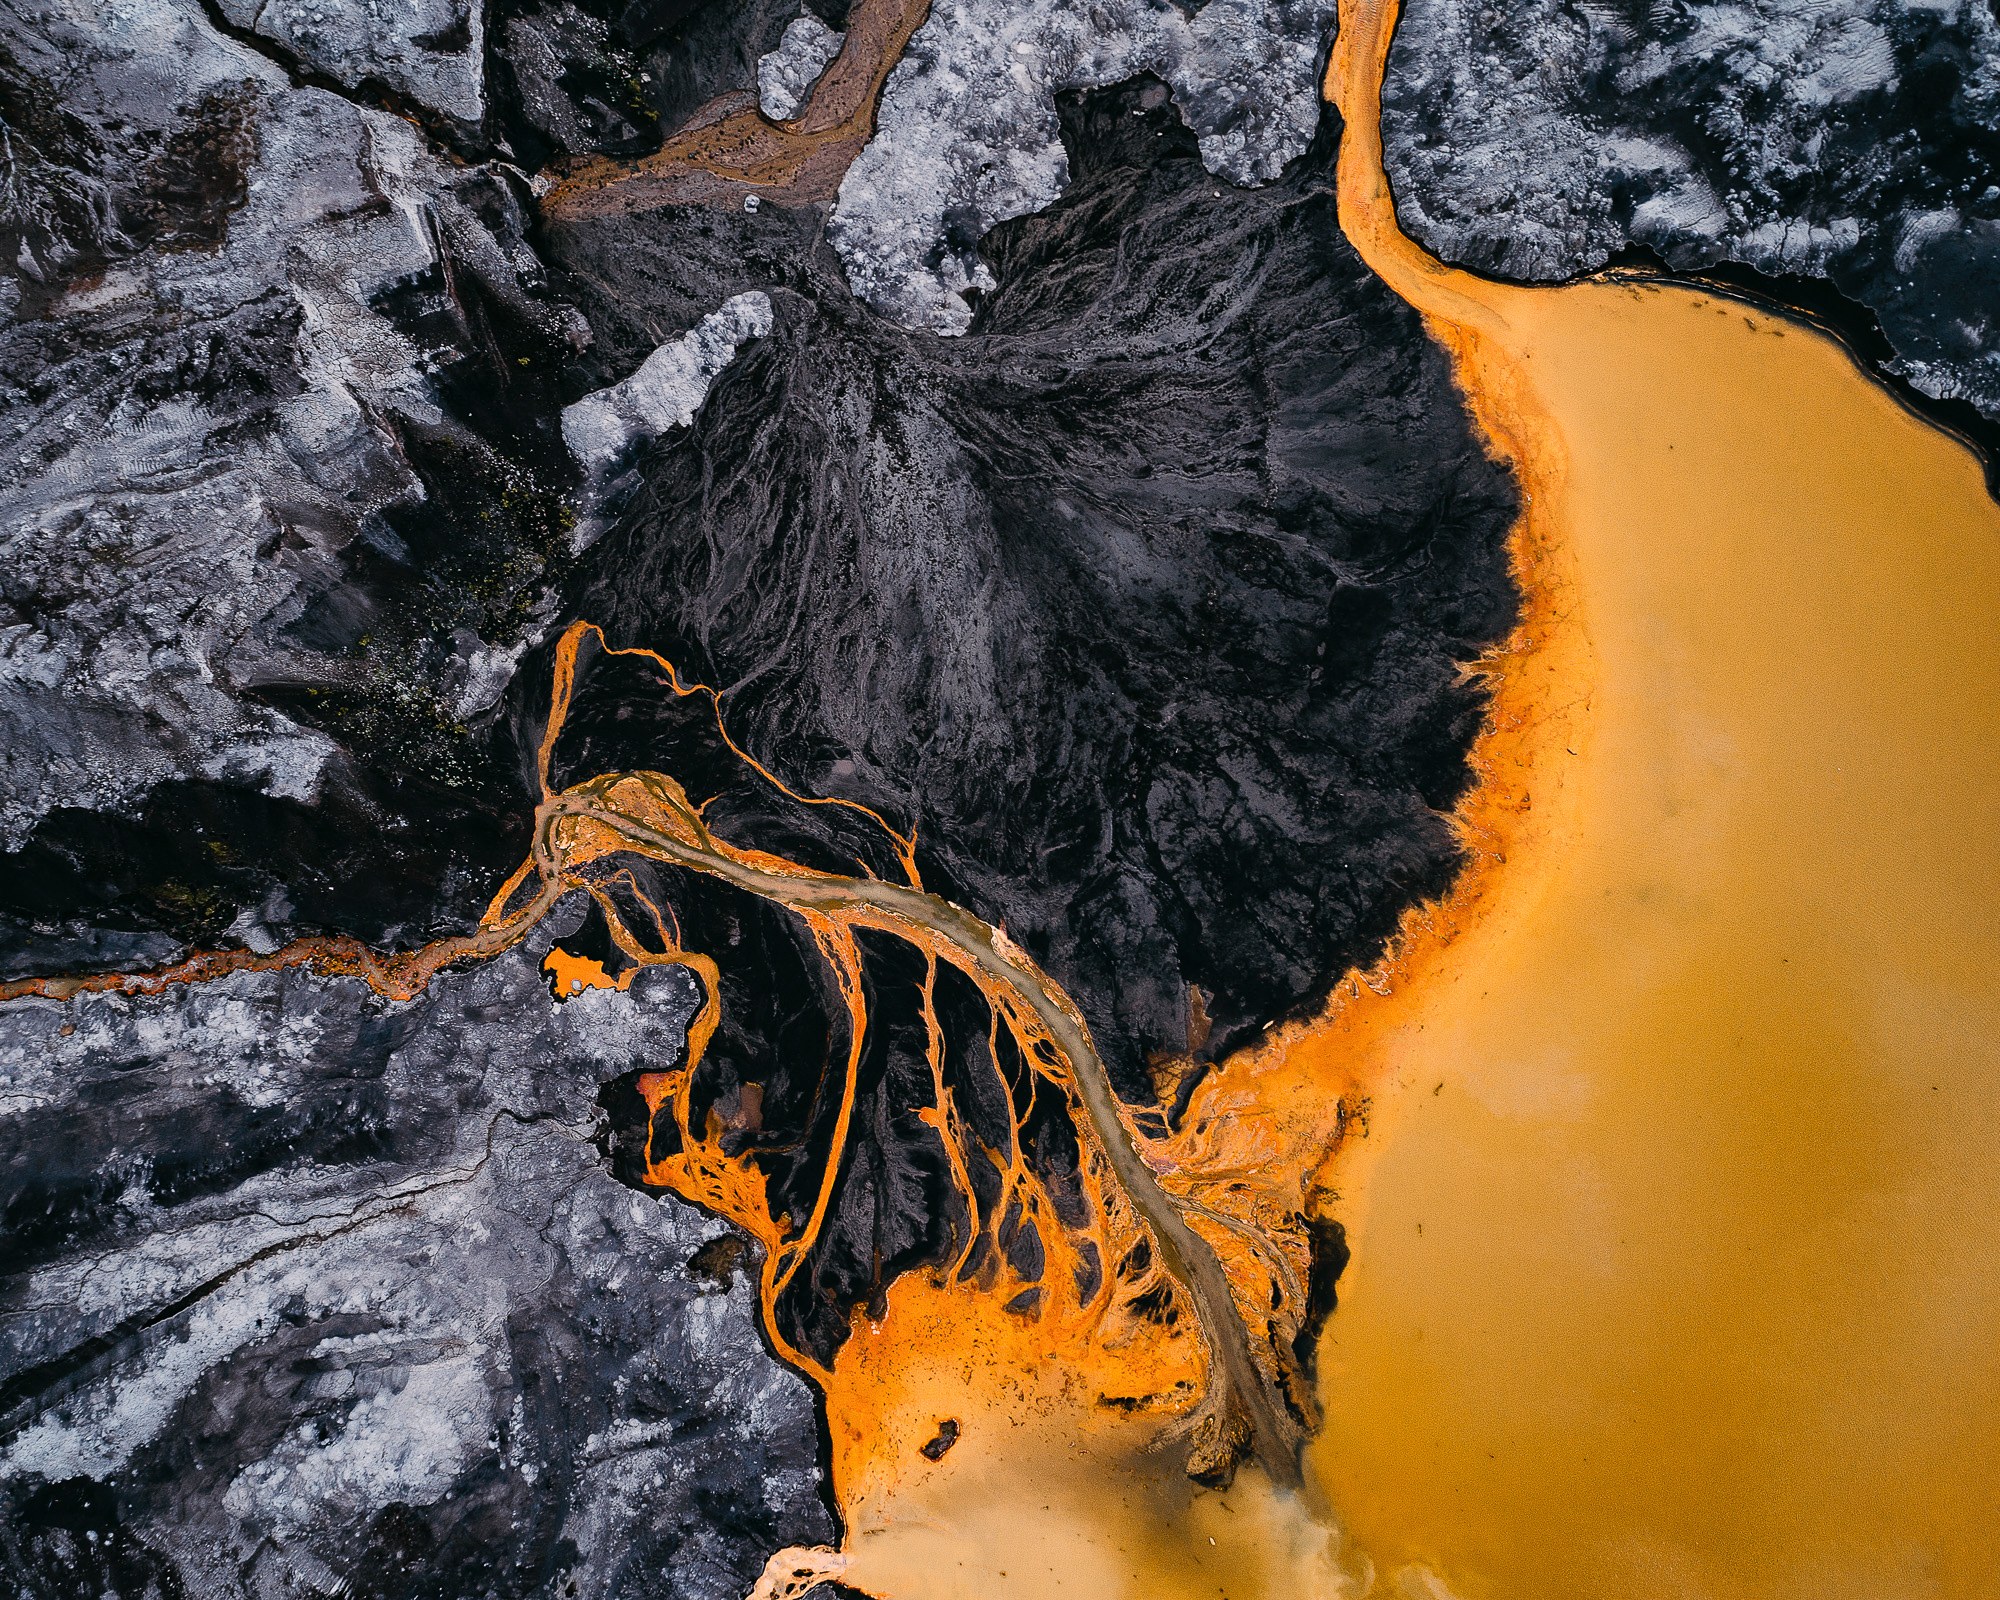 Tom Hegen's aerial series Toxic Water depicts landscapes affected by coal mining. PHOTOGRAPH: TOM HEGEN